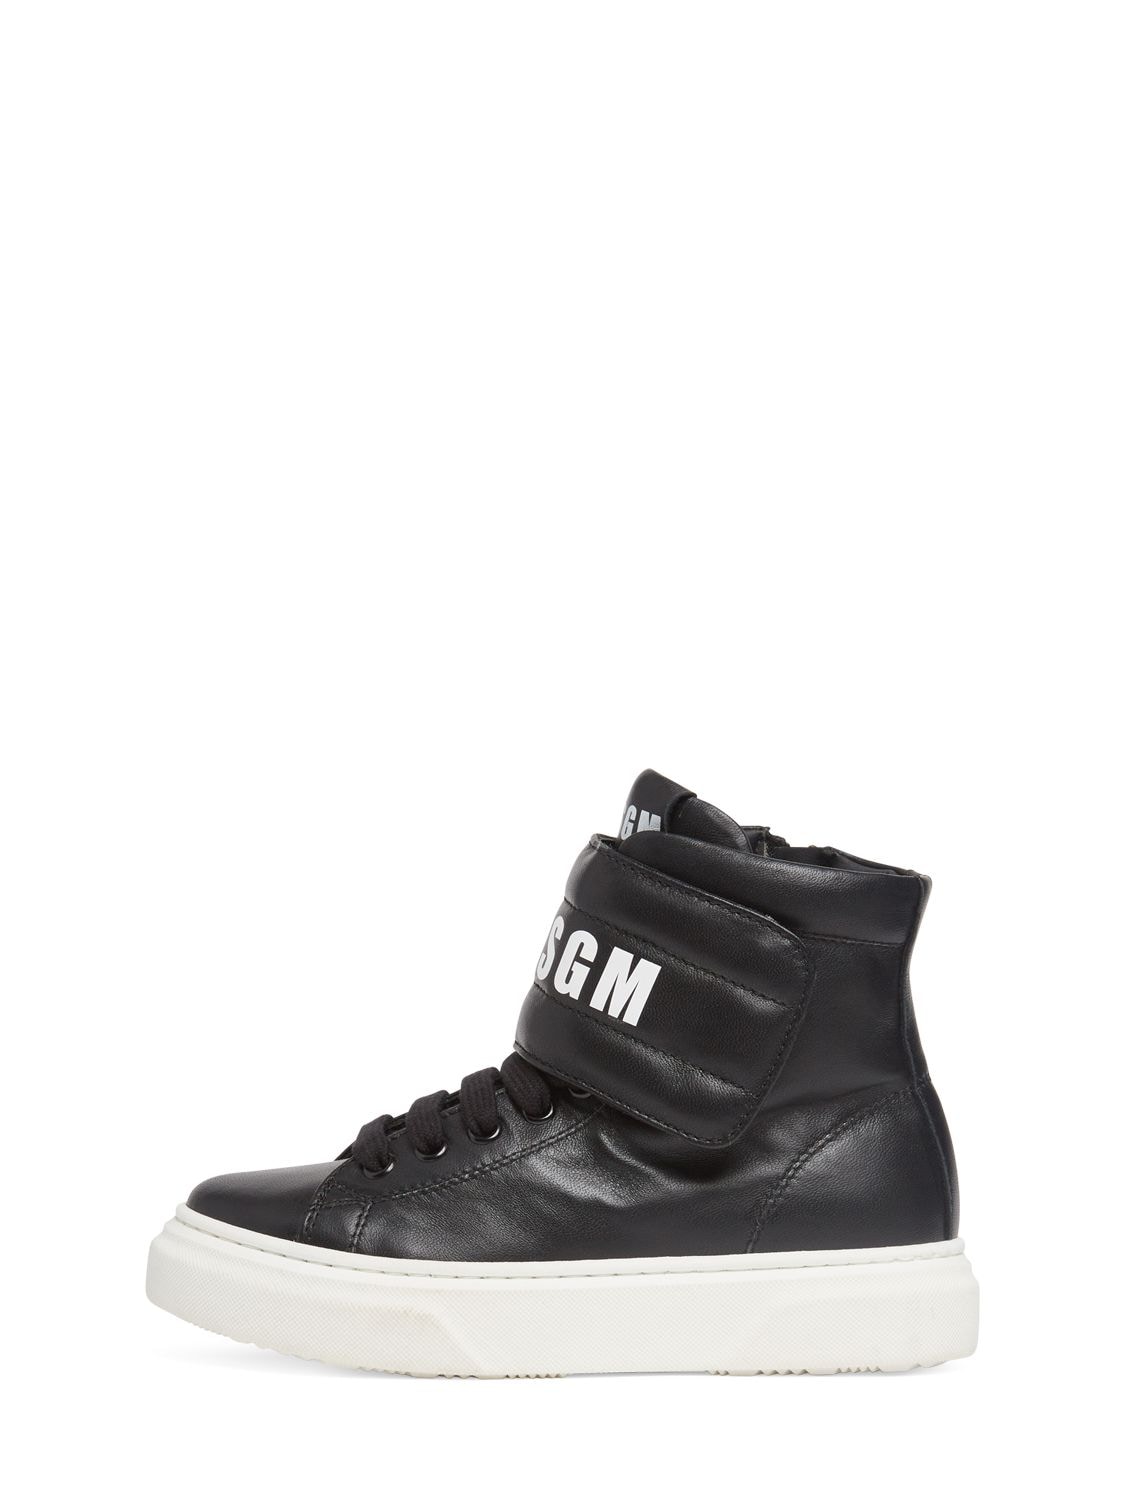 Image of Leather High Sneakers W/ Printed Logos